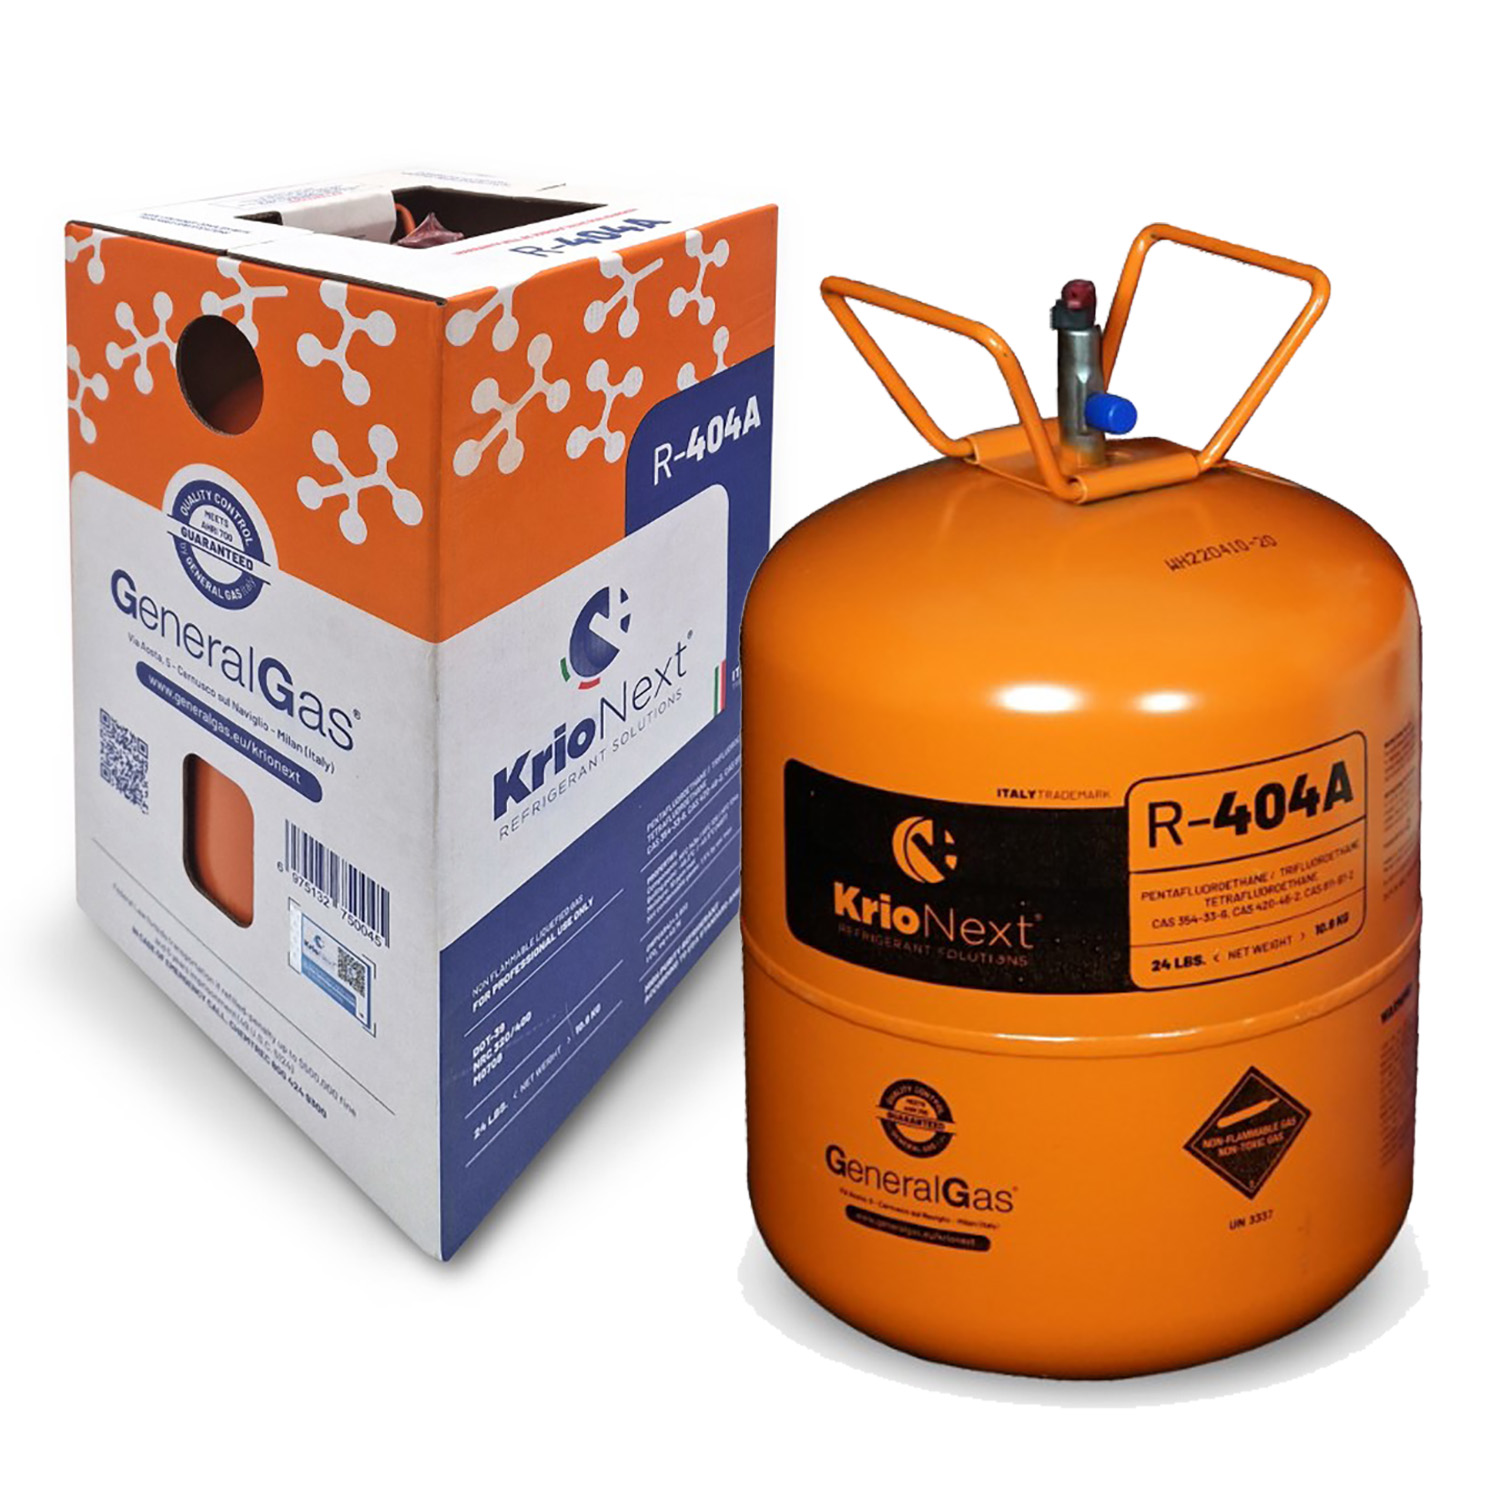 R404A KrioNext® 404A in DOT39 non-refillable cylinder 13,77 Lt / 27 Bar - 10,9 Kg/24 lb - Quality meets AHRI700-2019 USA standard (guaranteed by lab of GeneralGas Zhejiang Co. LTD.)